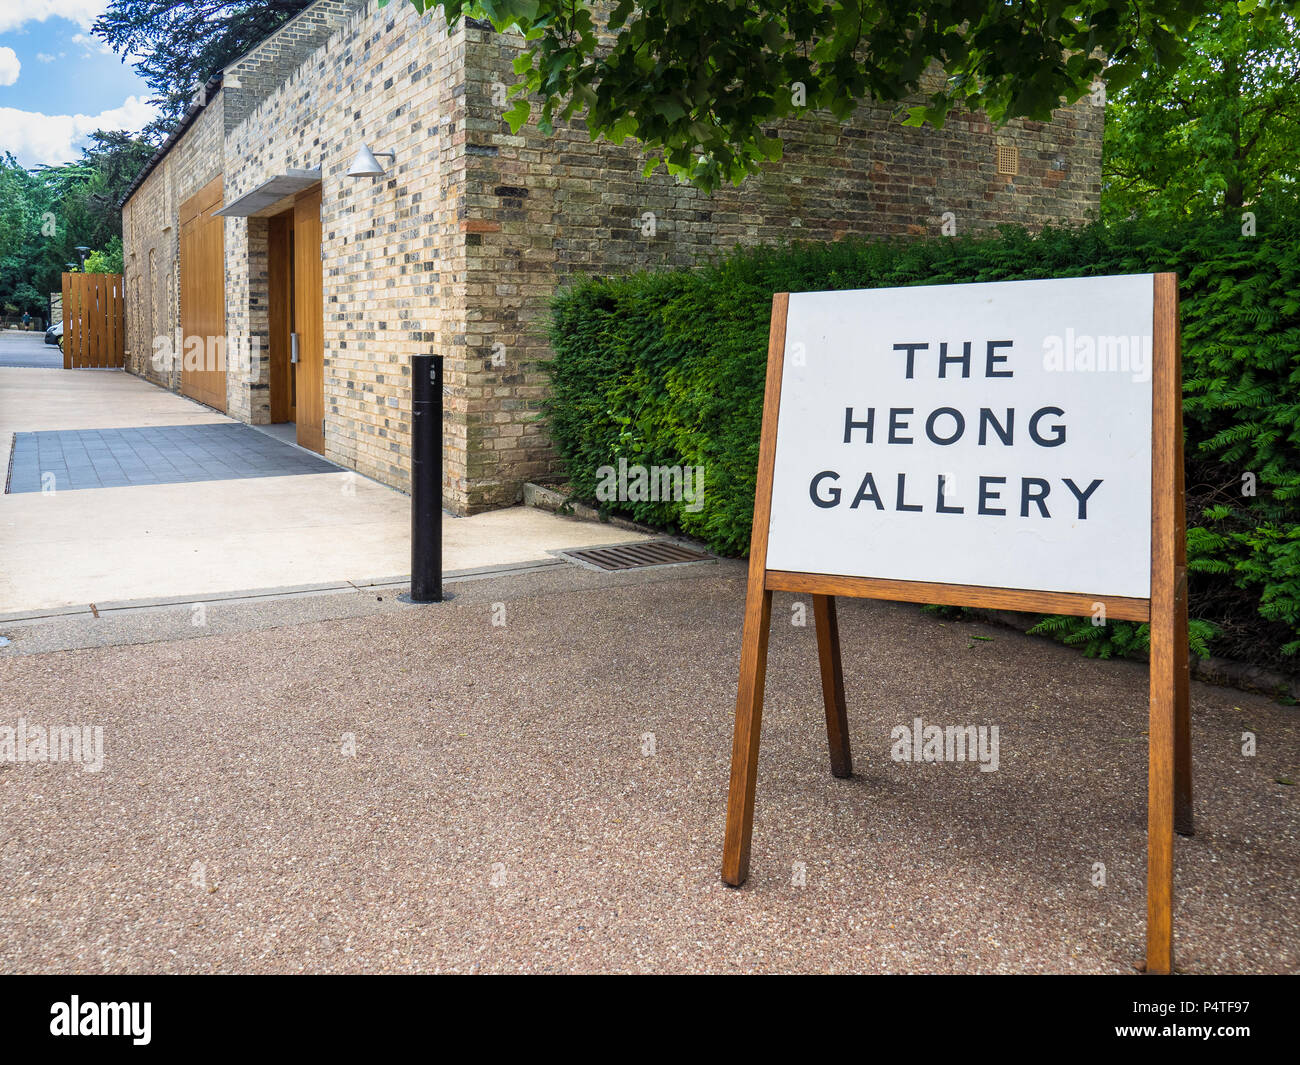 Entrance to the Heong Gallery in Downing College, part of the University of Cambridge in Cambridge, UK. Opened in 2016 and named after Alwyn Heong. Stock Photo